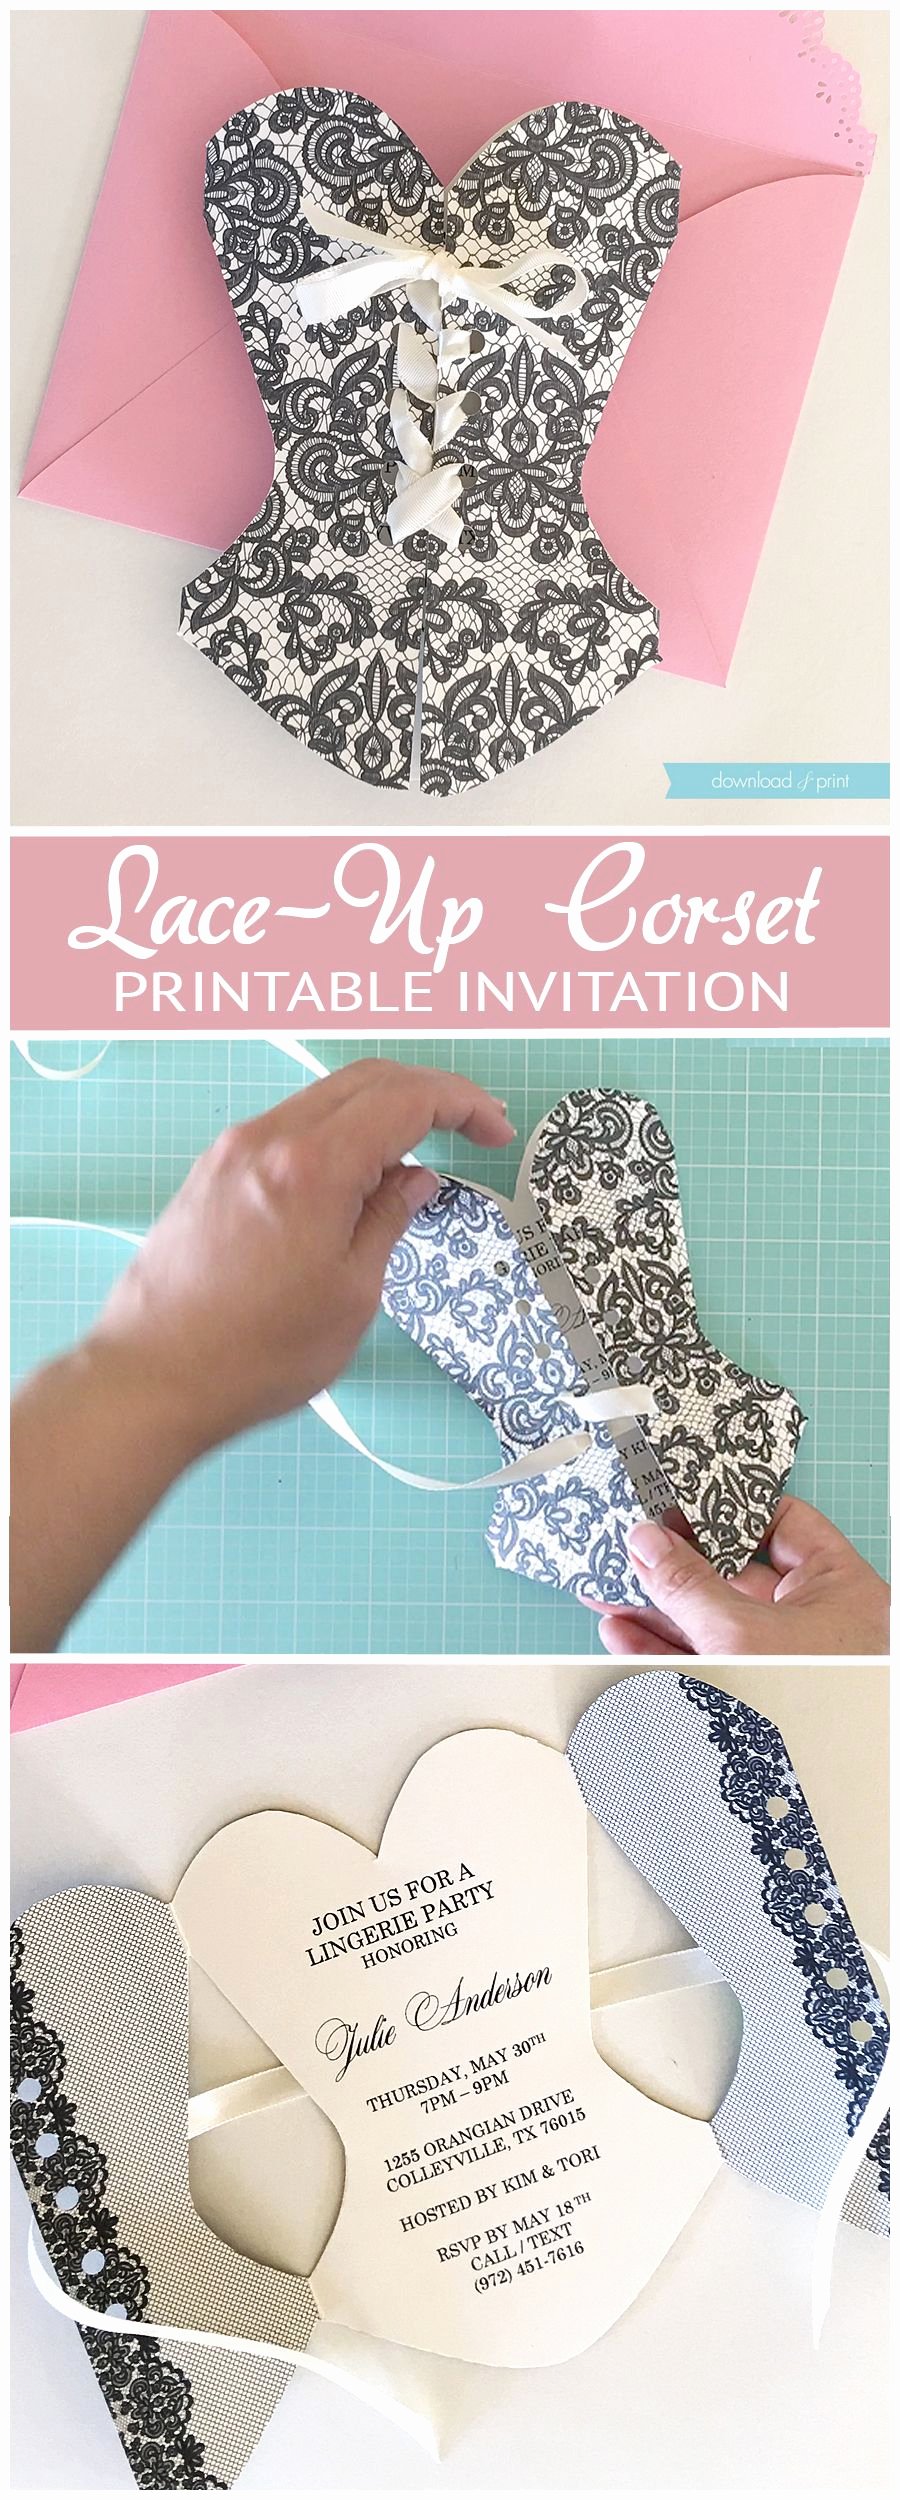 Diy Lace Up Corset Invitation that S so Easy to Make if